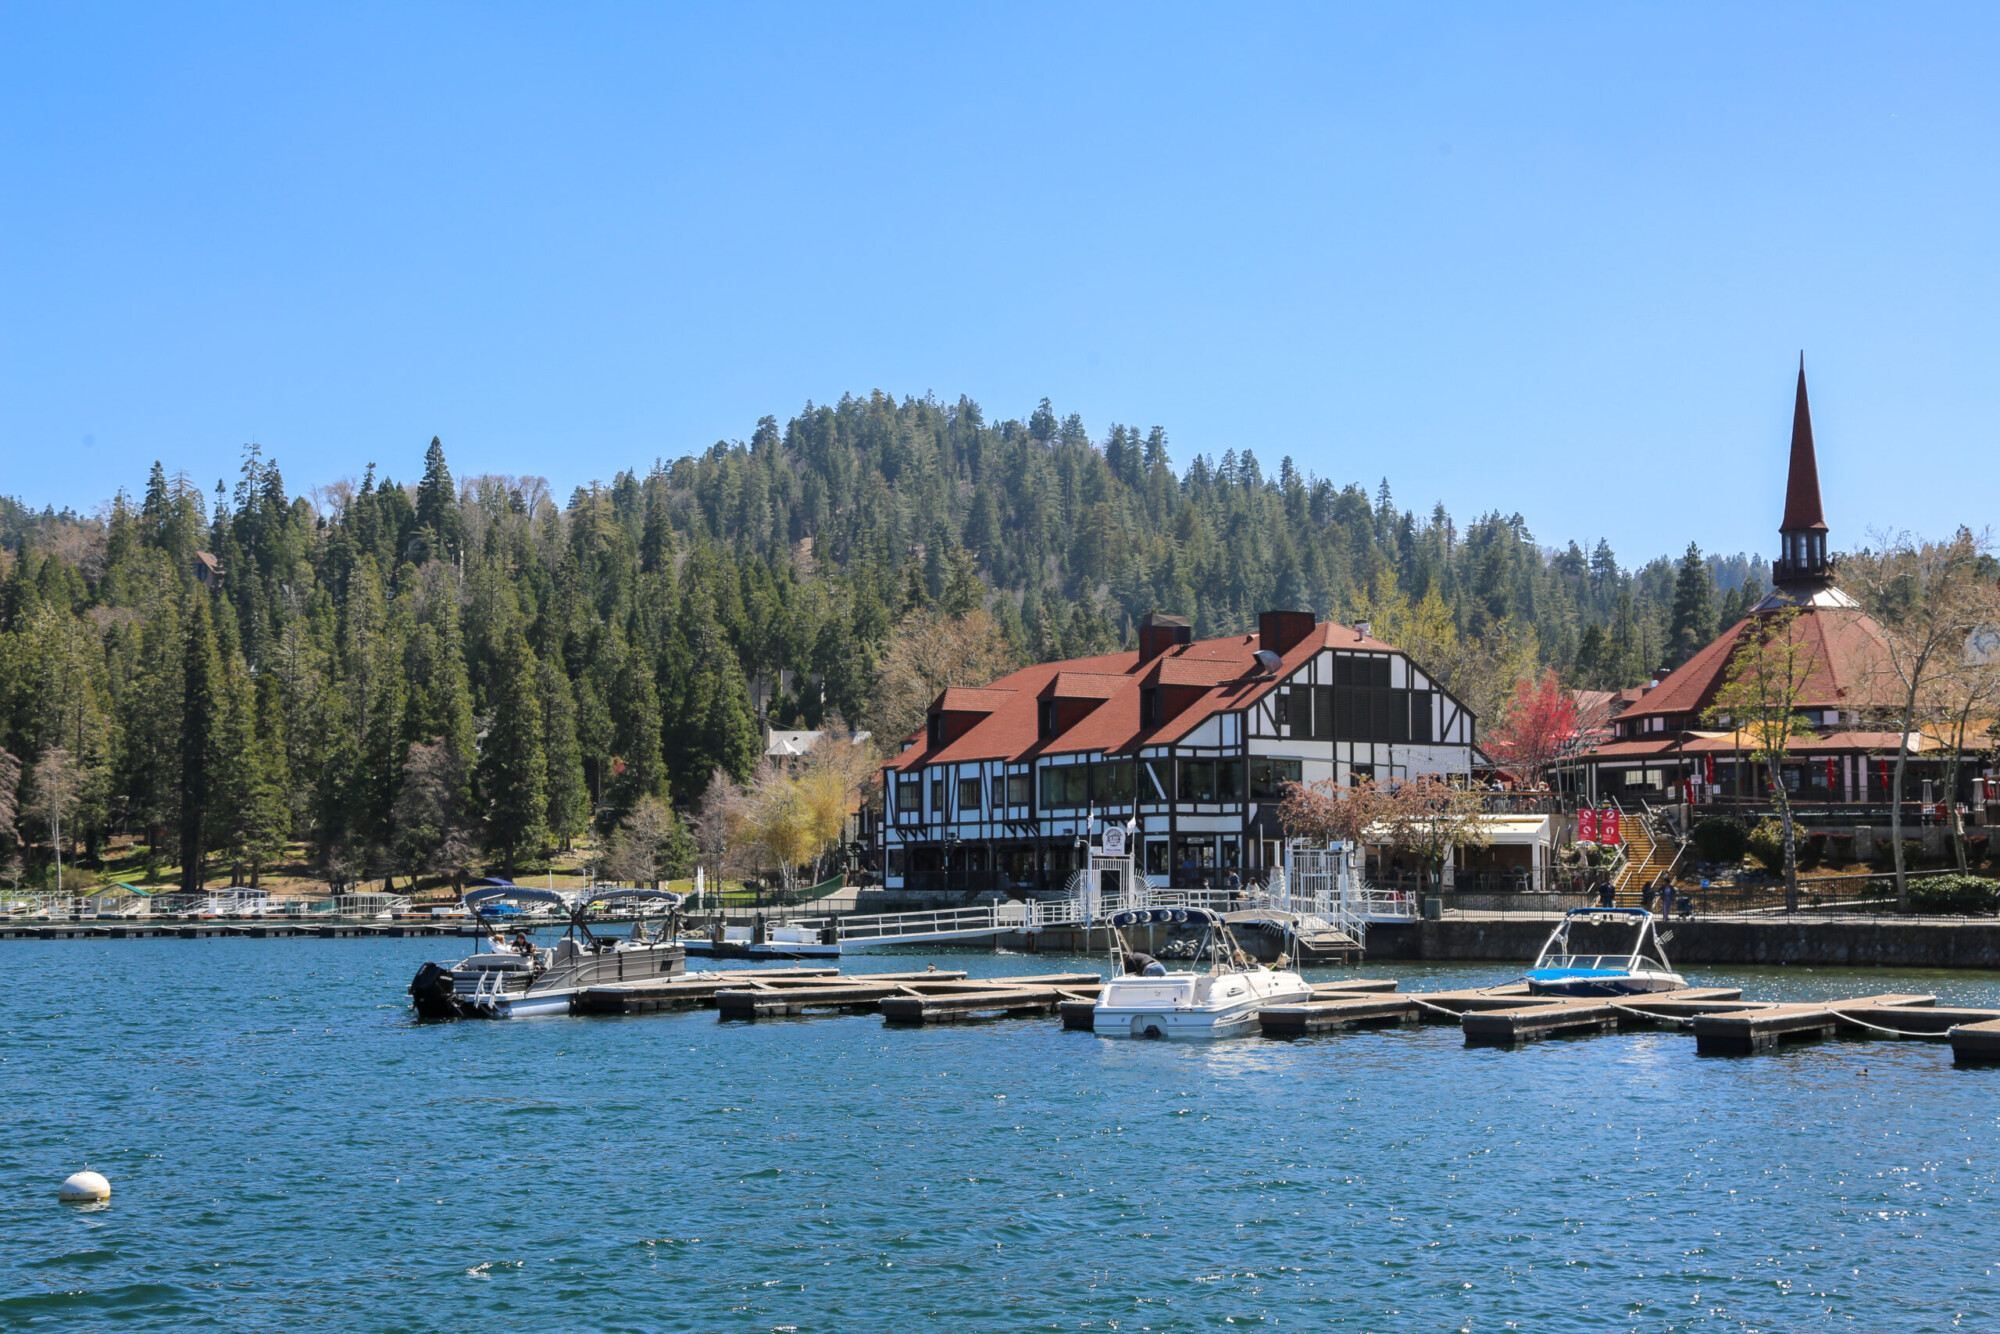 View from the water of the Lake Arrowhead commercial townsite in Spring.